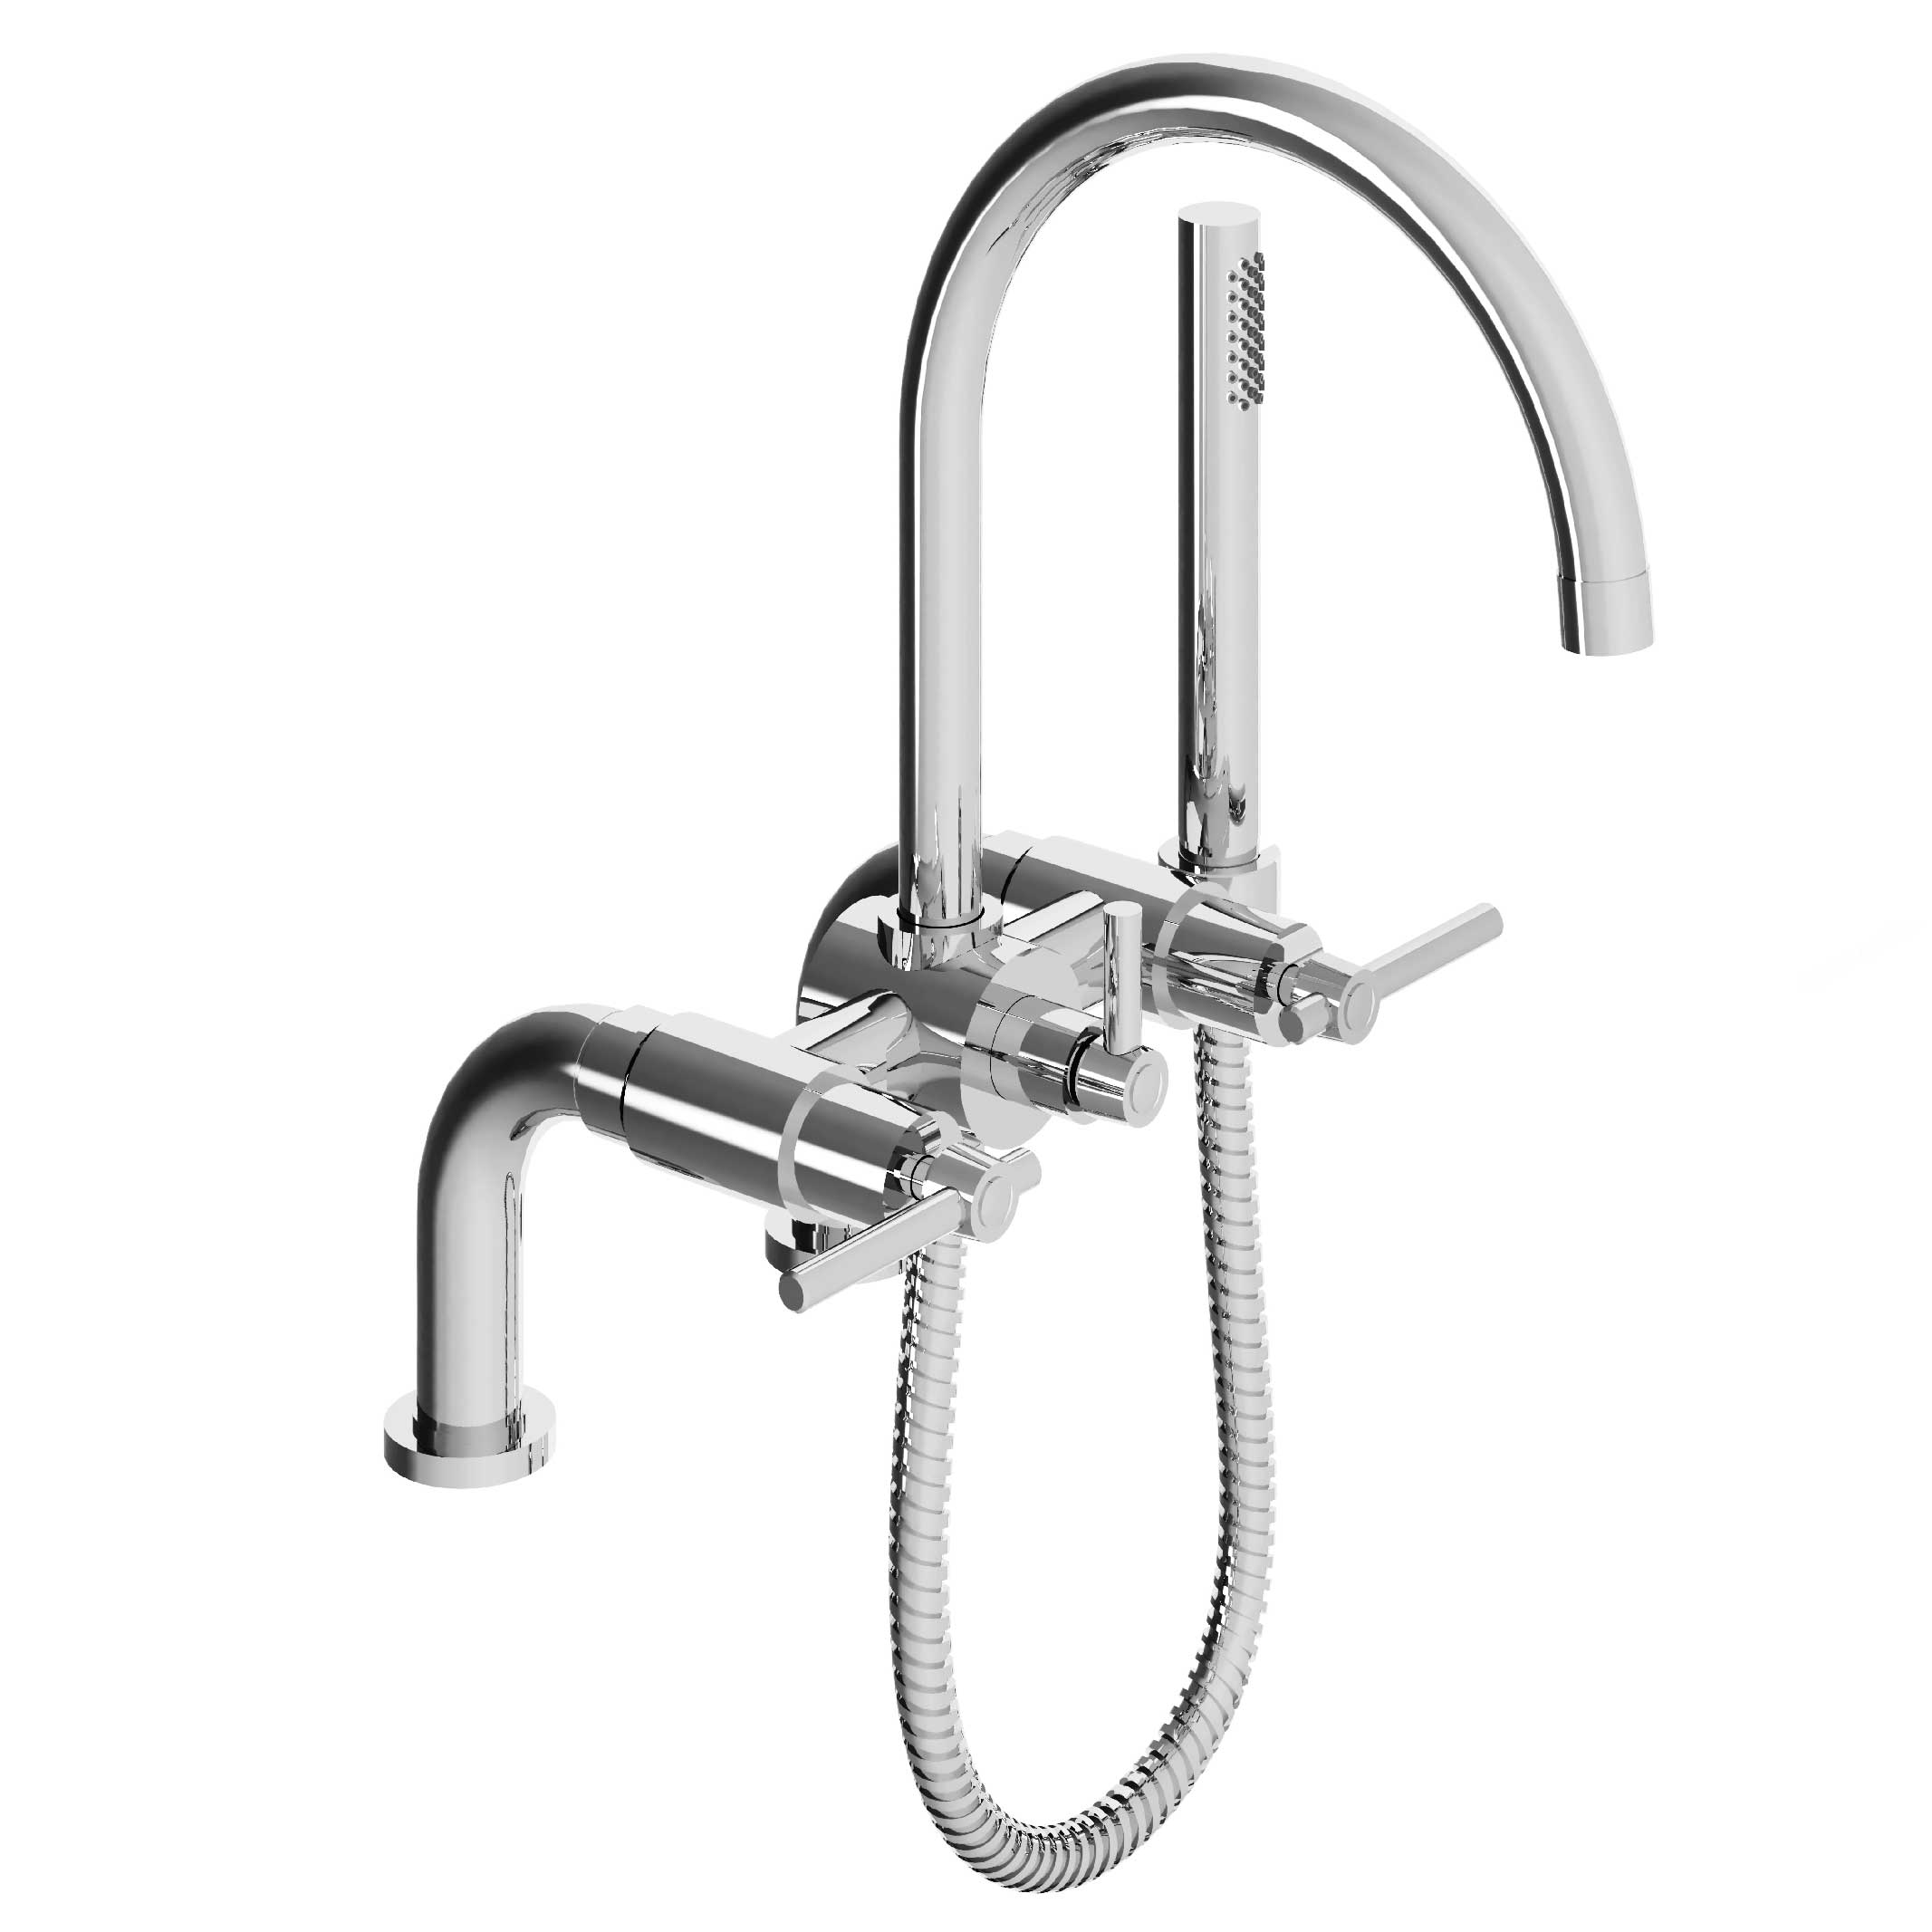 M91-3306 Rim mounted bath and shower mixer